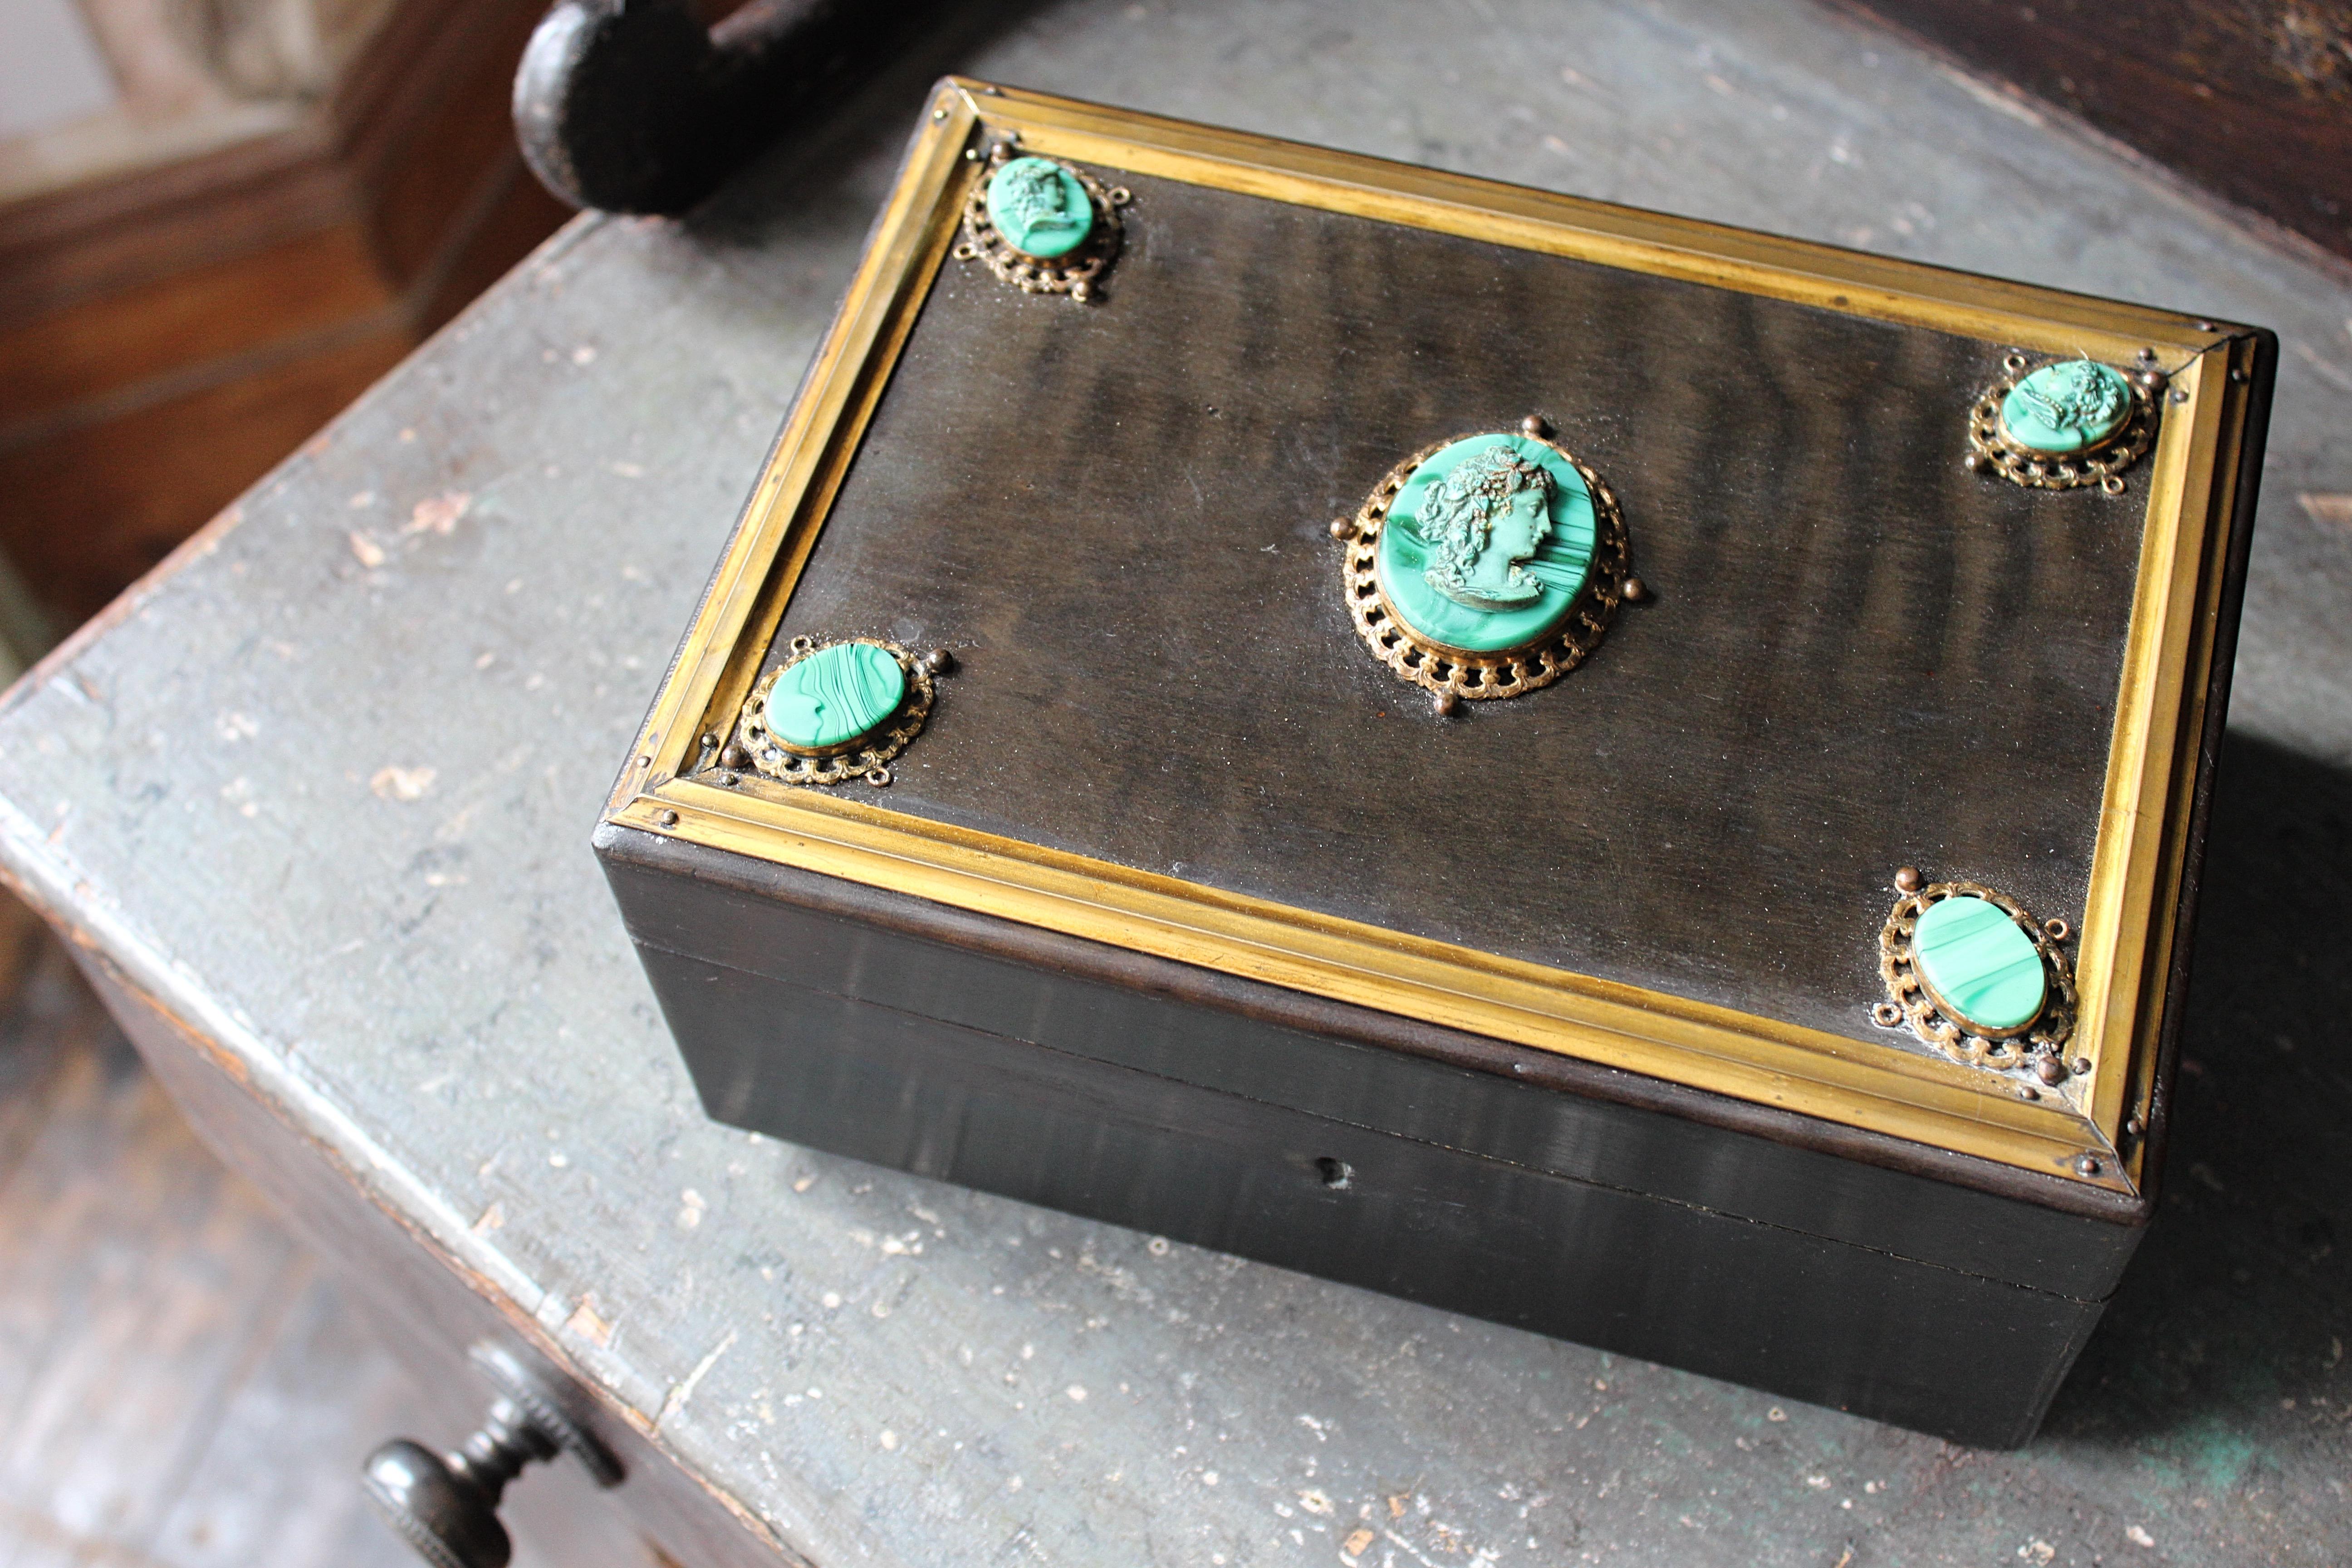 A good quality brass bound and ebonised trinket/jewellery box, decorative with malachite stones and cameos.

The interior is a lovely faded blue silk with decorative pipping, with its original cast brass hinges and a wooden caucus

Age related